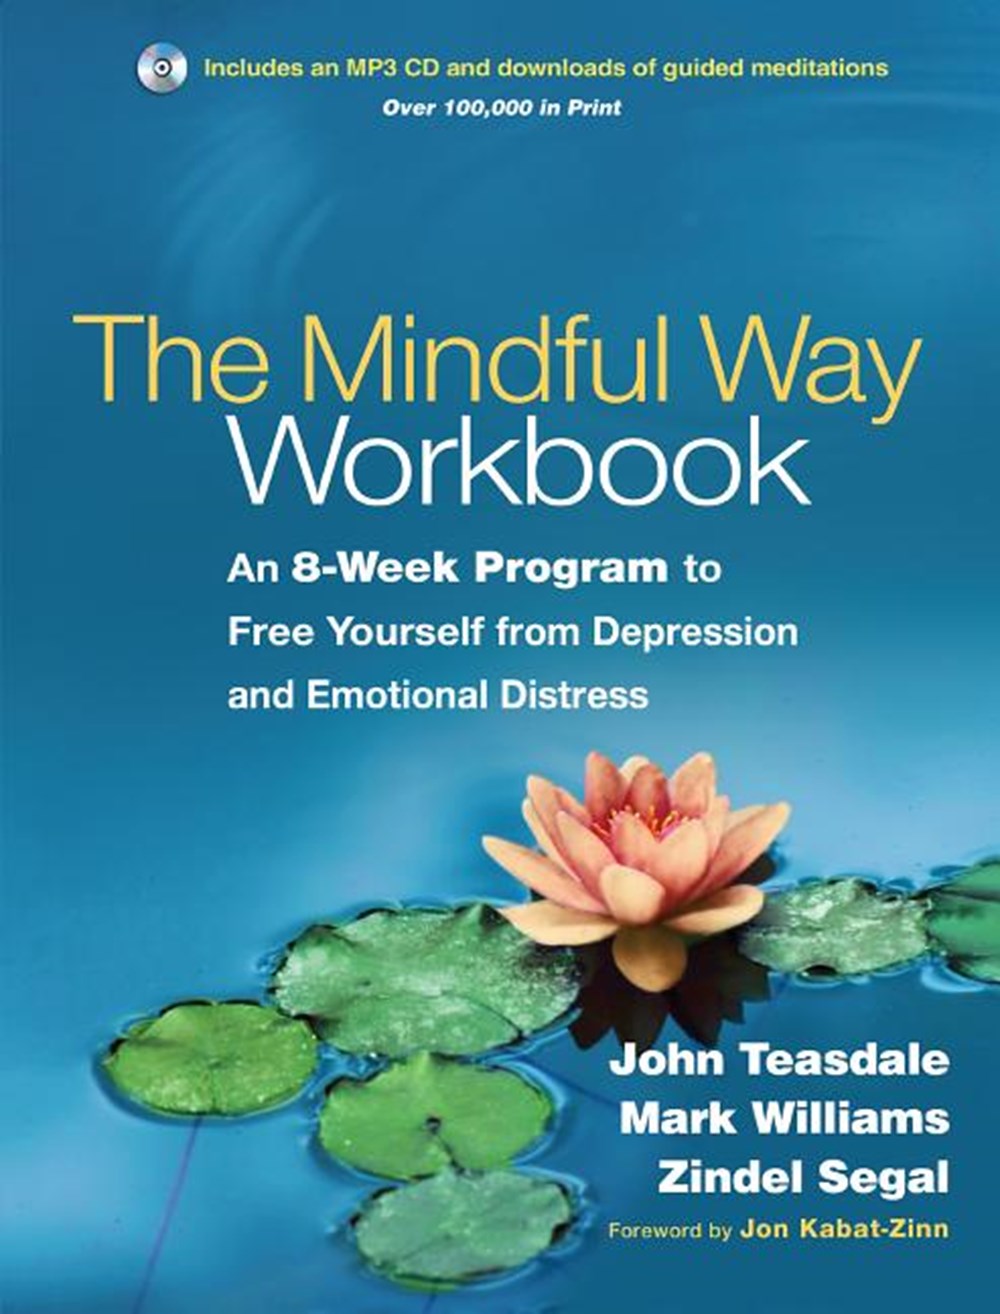 Mindful Way Workbook An 8-Week Program to Free Yourself from Depression and Emotional Distress [With